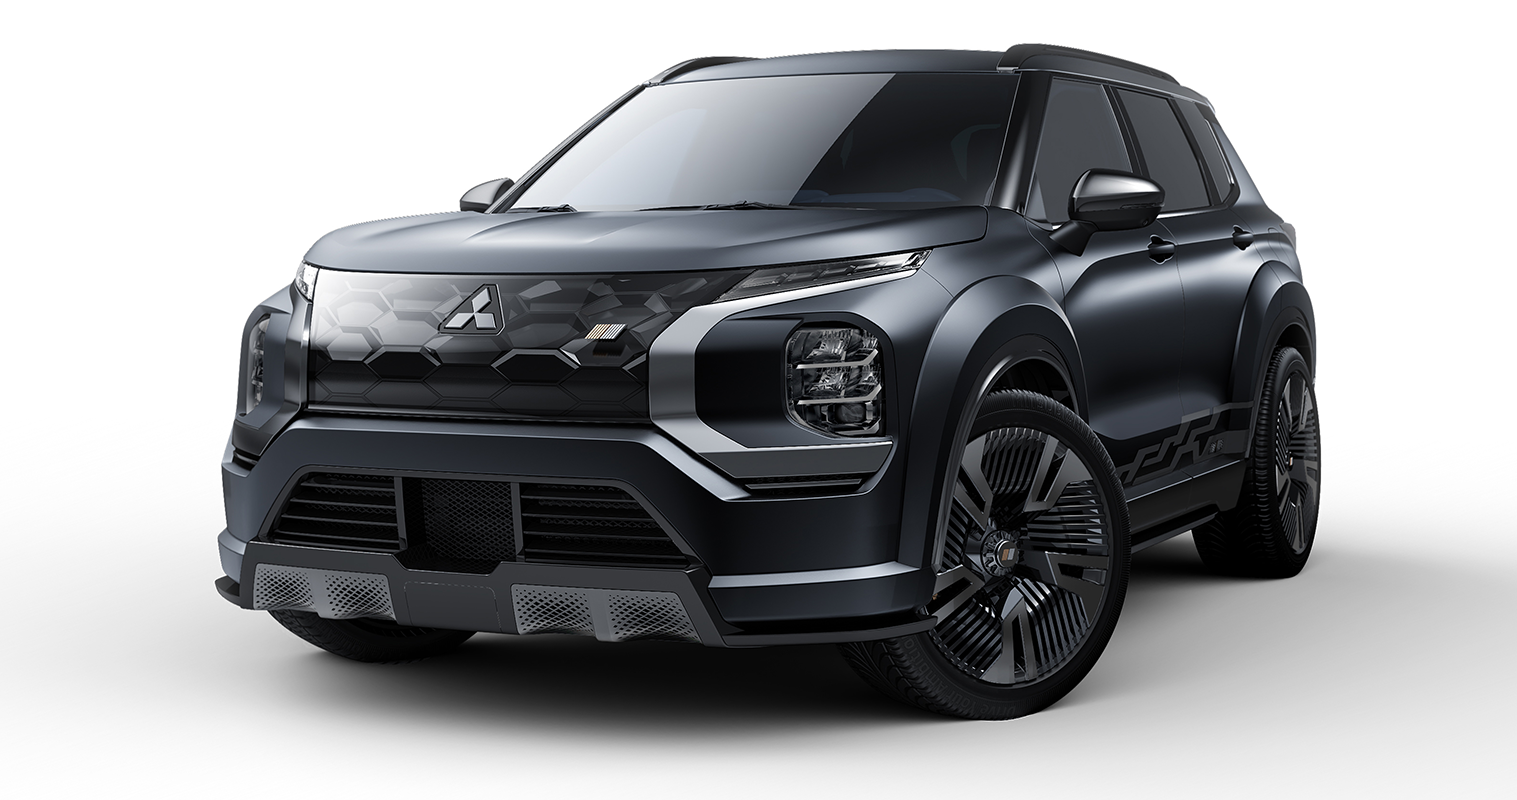 Vision Ralliart Concept1